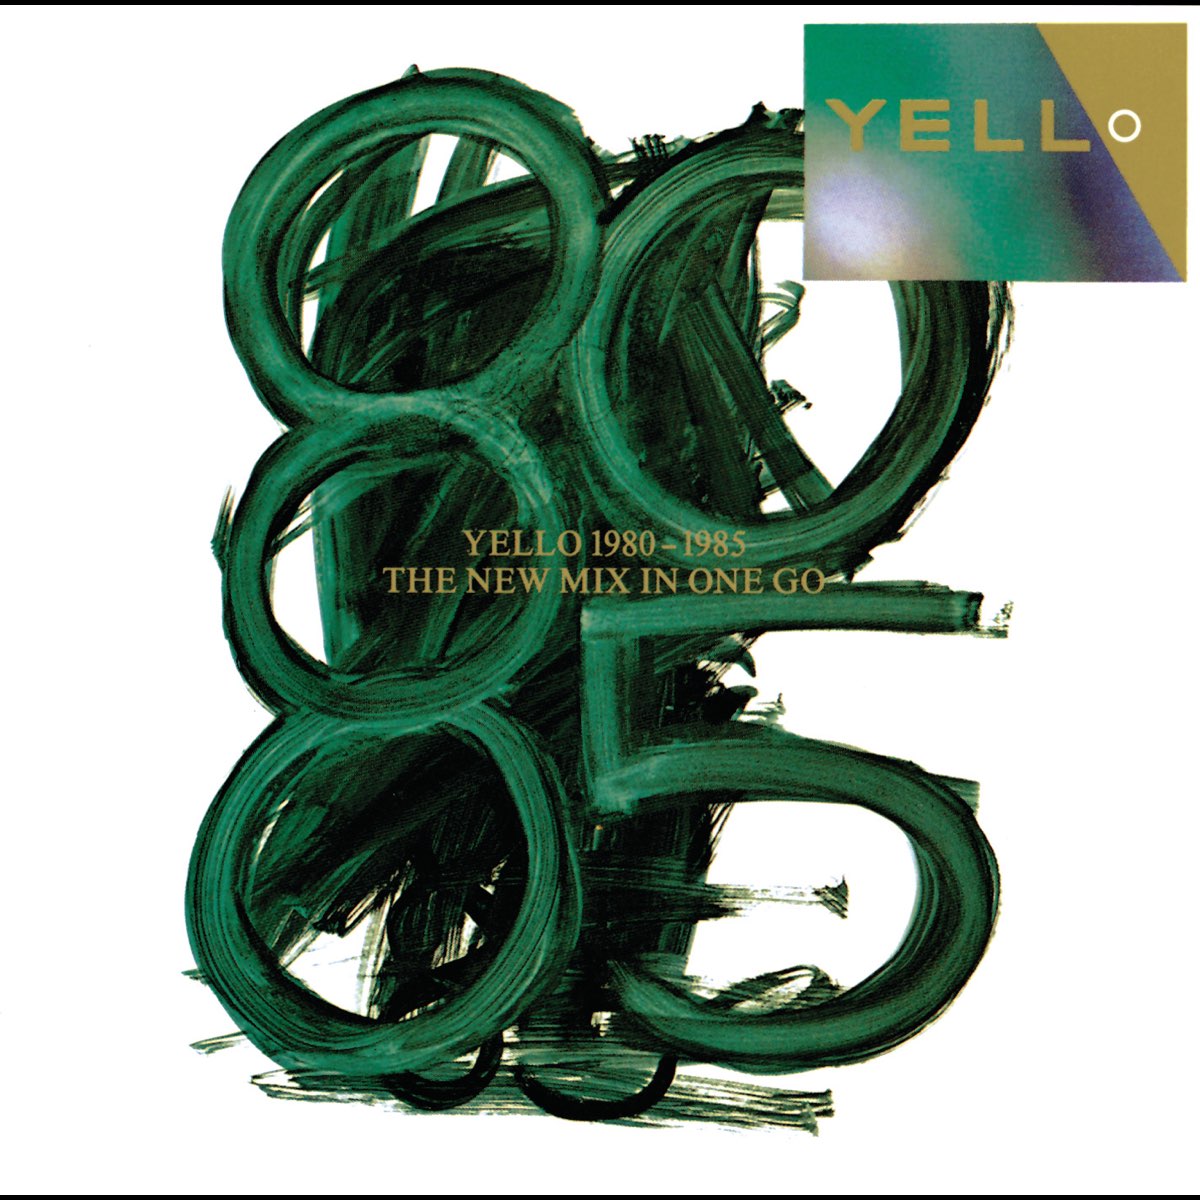 Yello 1980-1985: The New Mix In One Go by Yello Apple Music